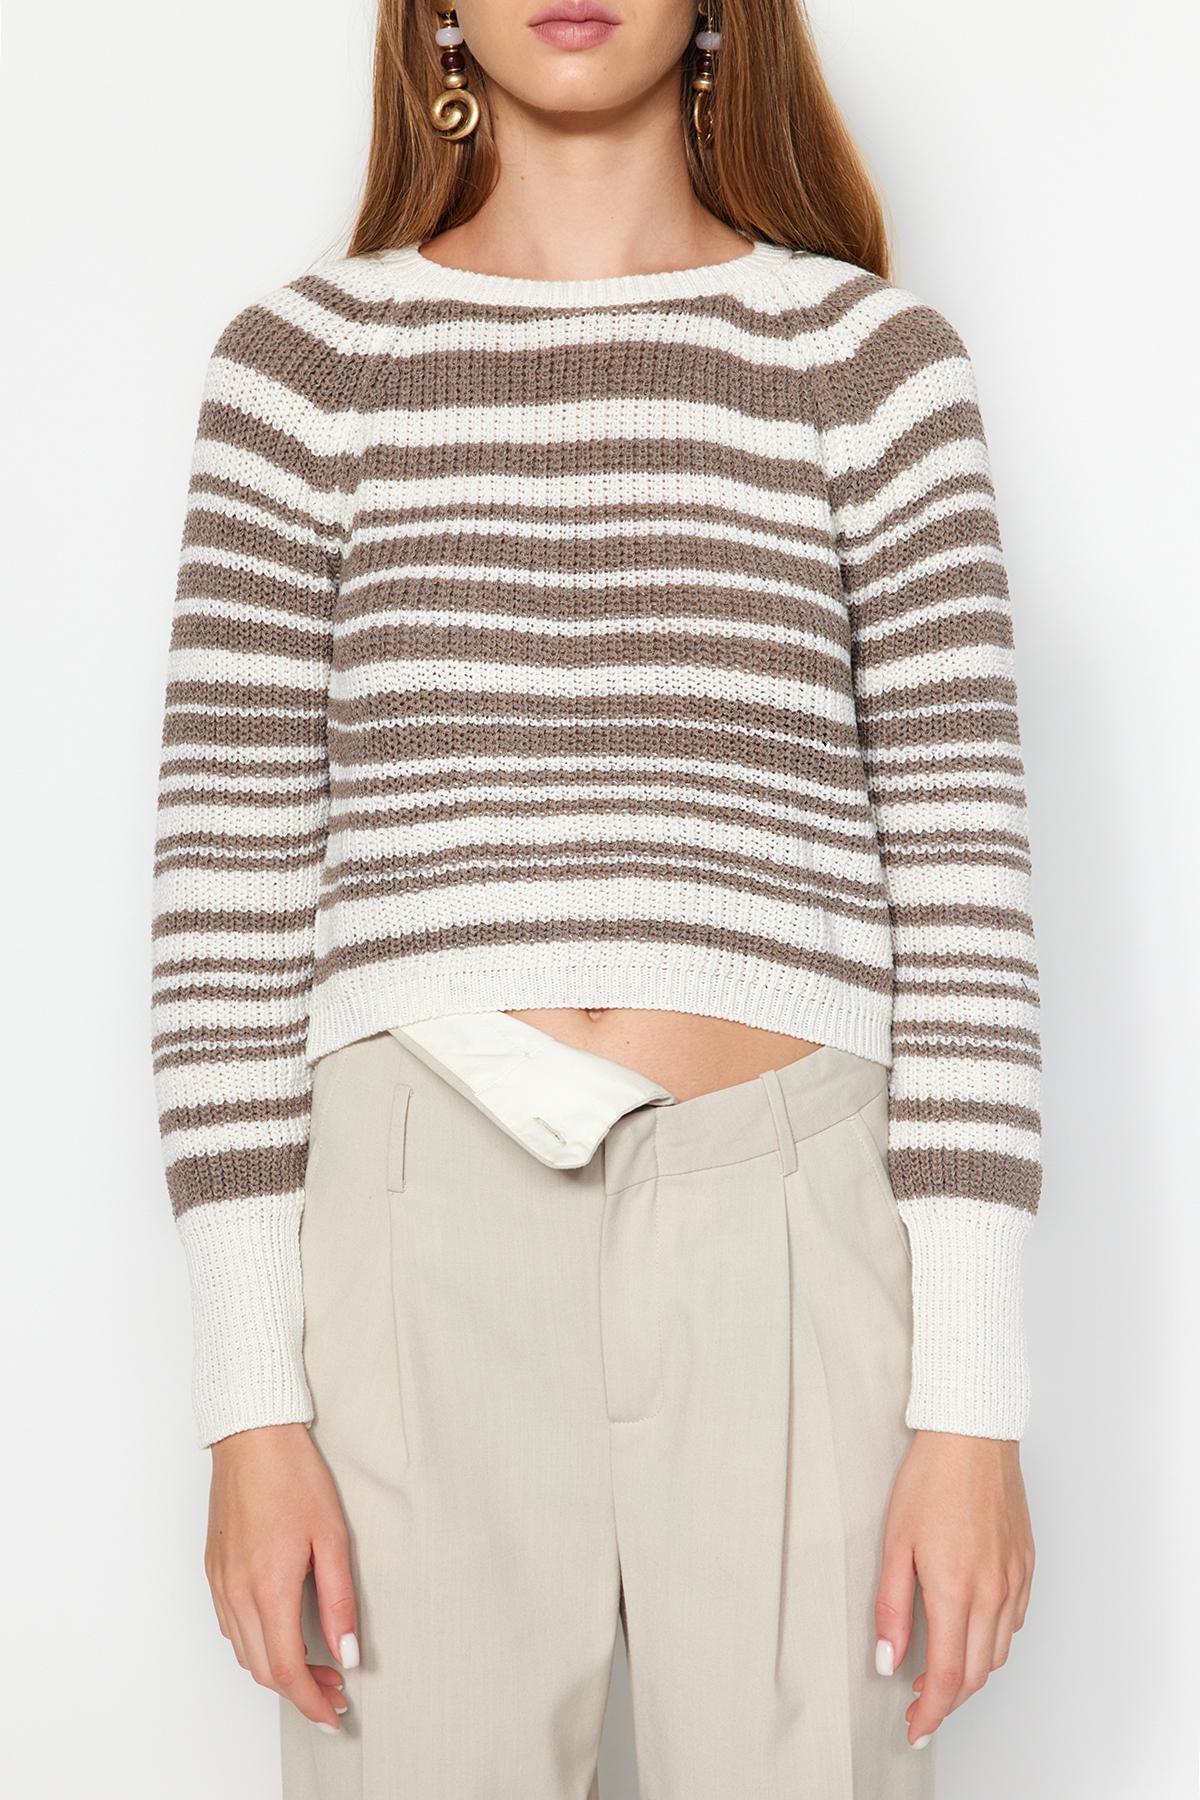 Trendyol - Cream Striped Knitted Sweater